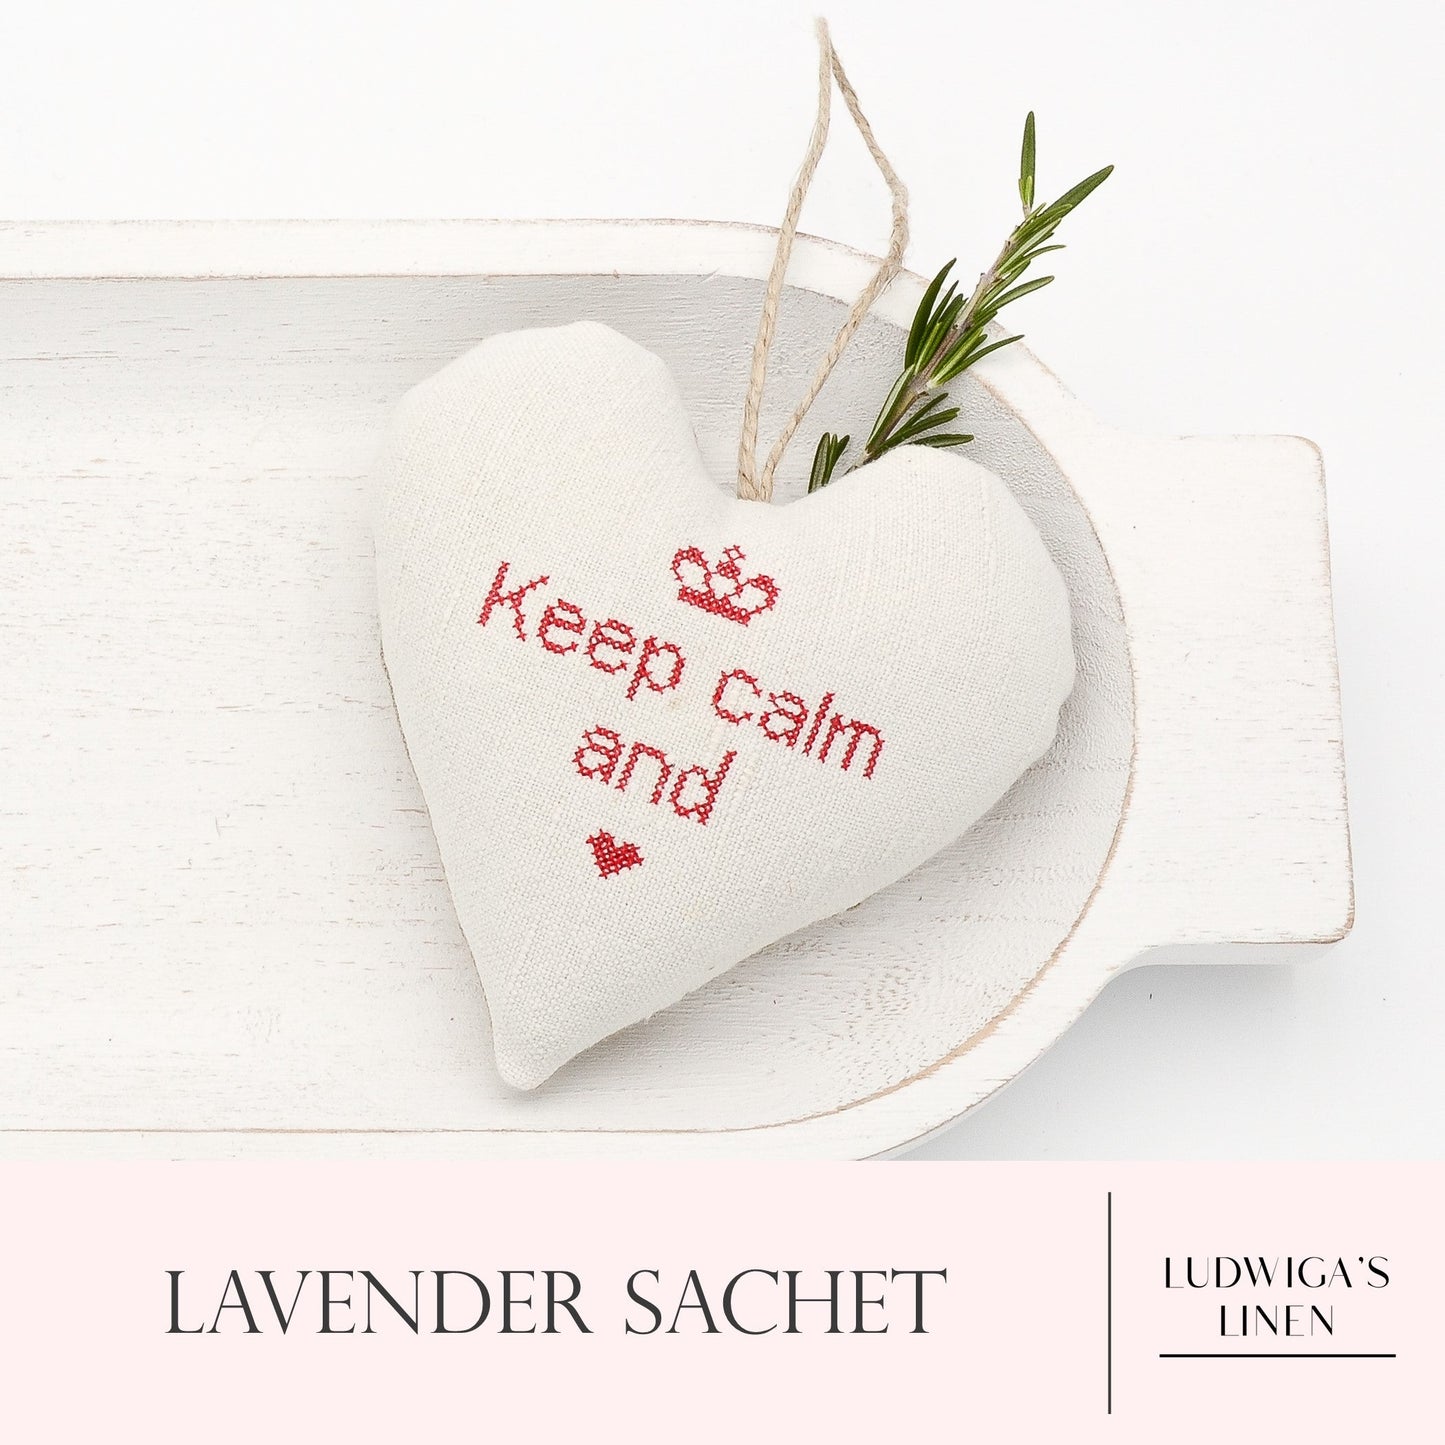 Antique/vintage European white linen lavender sachet heart with "keep calm and love" embroidered in red, hemp twine tie and filled with high quality lavender from Provence France